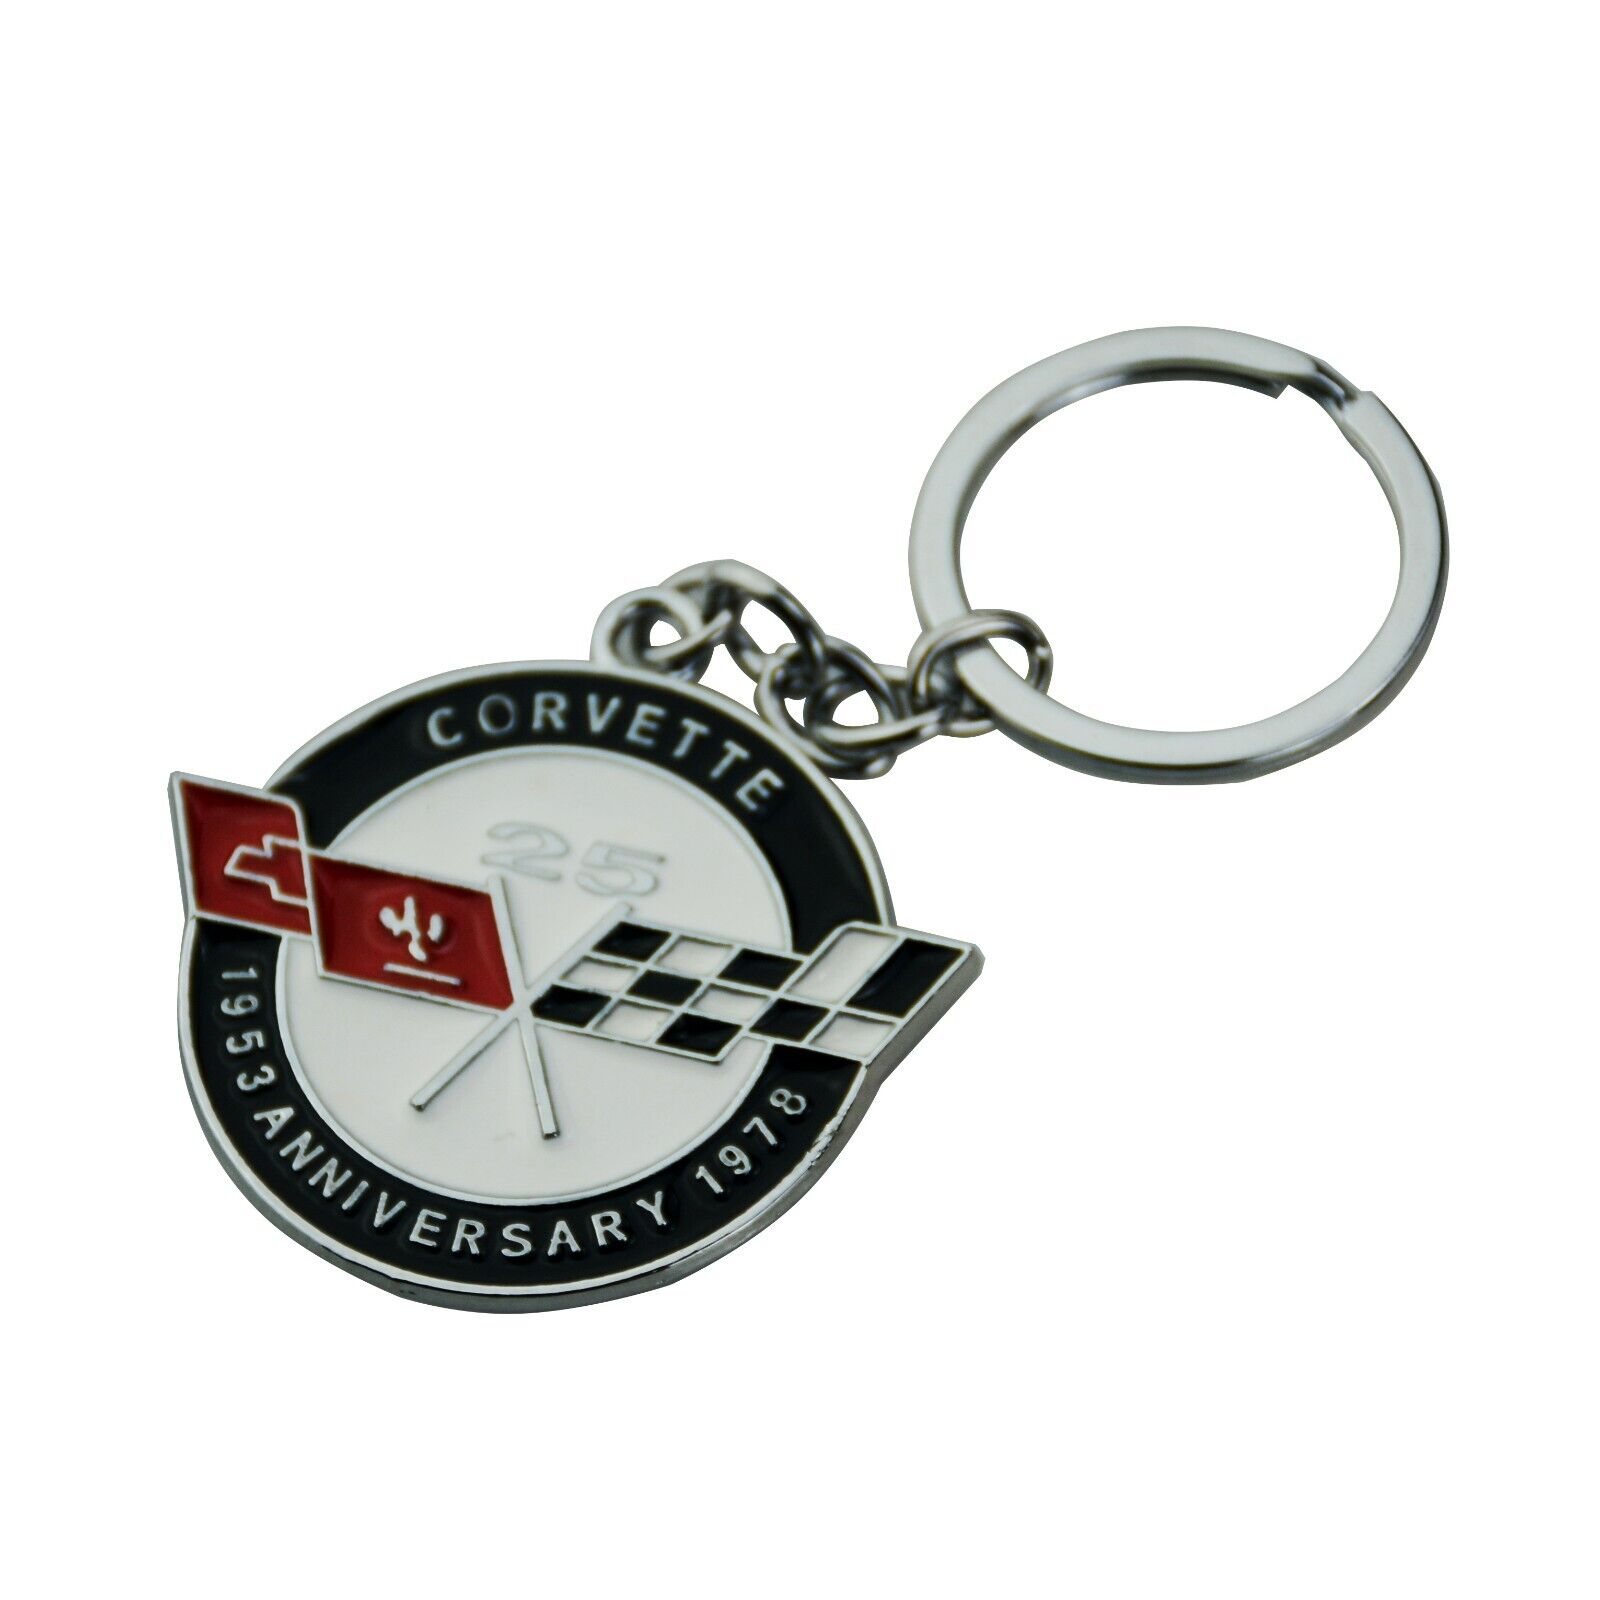 25th Anniversary  keychain Car Alloy Key Chain Ring Gift For 1978 C3 Corvette